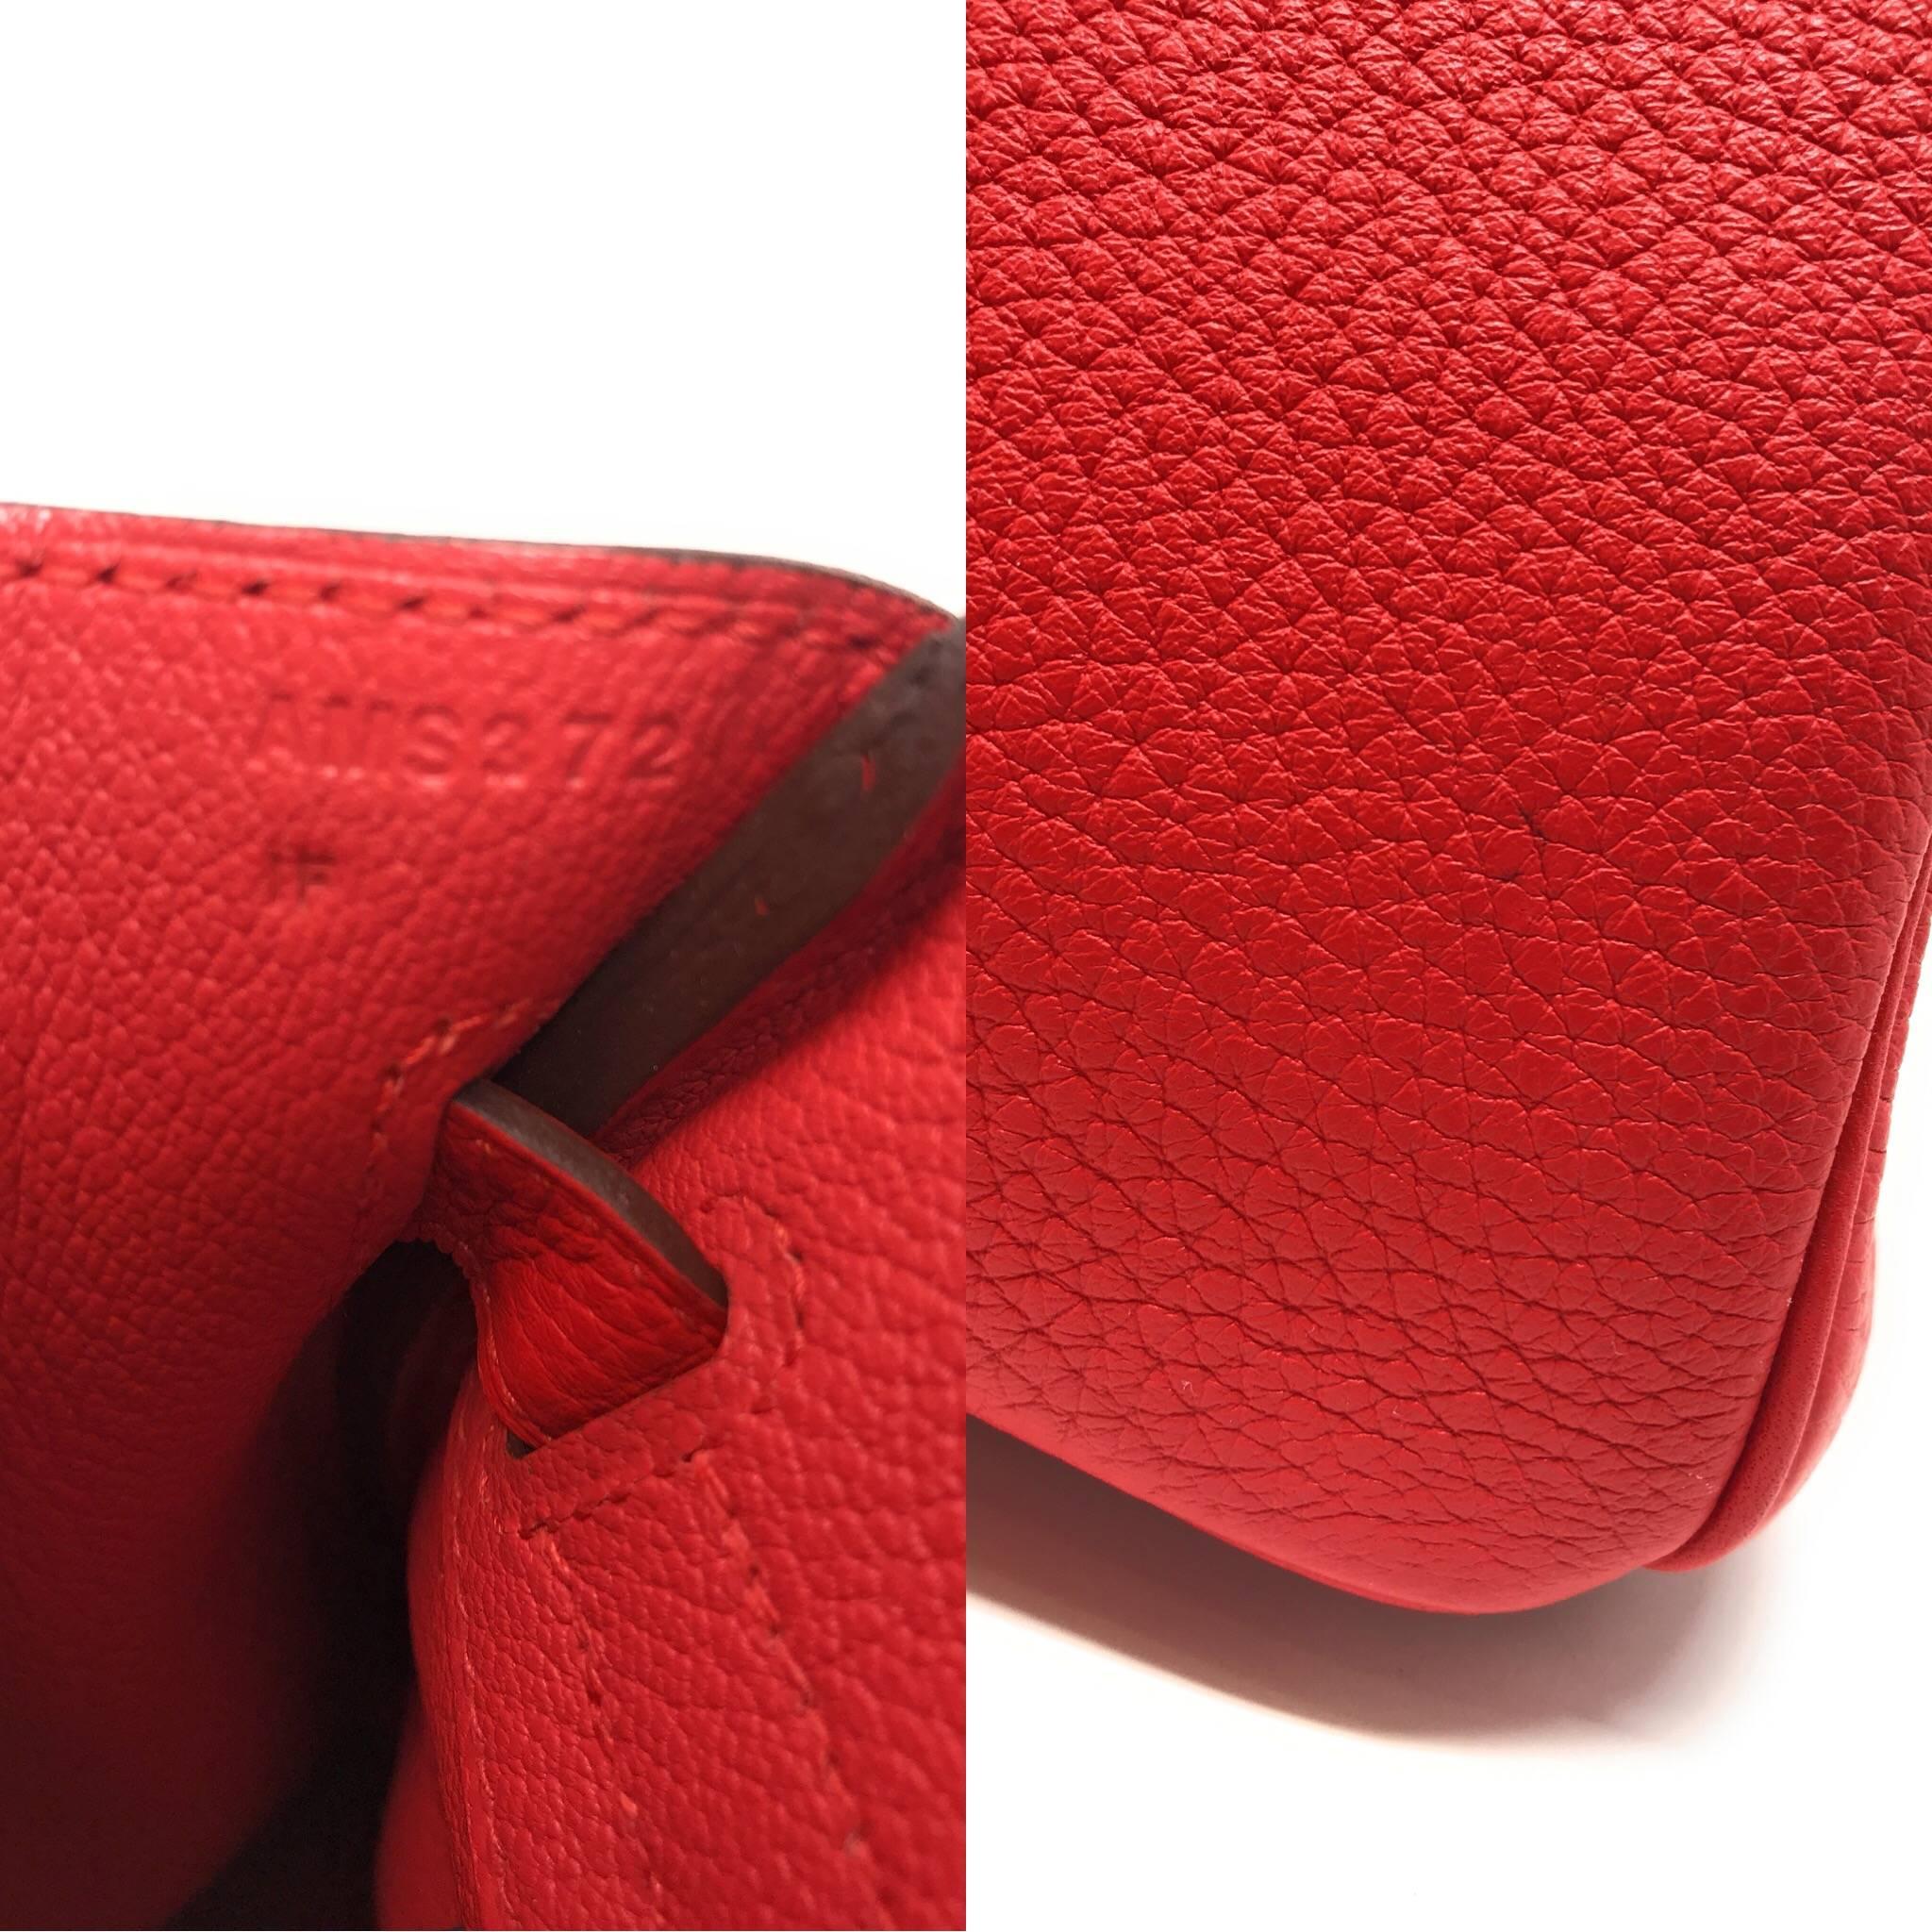 Hermes Birkin 30cm Rouge Tomate In Excellent Condition For Sale In Los Angeles, CA